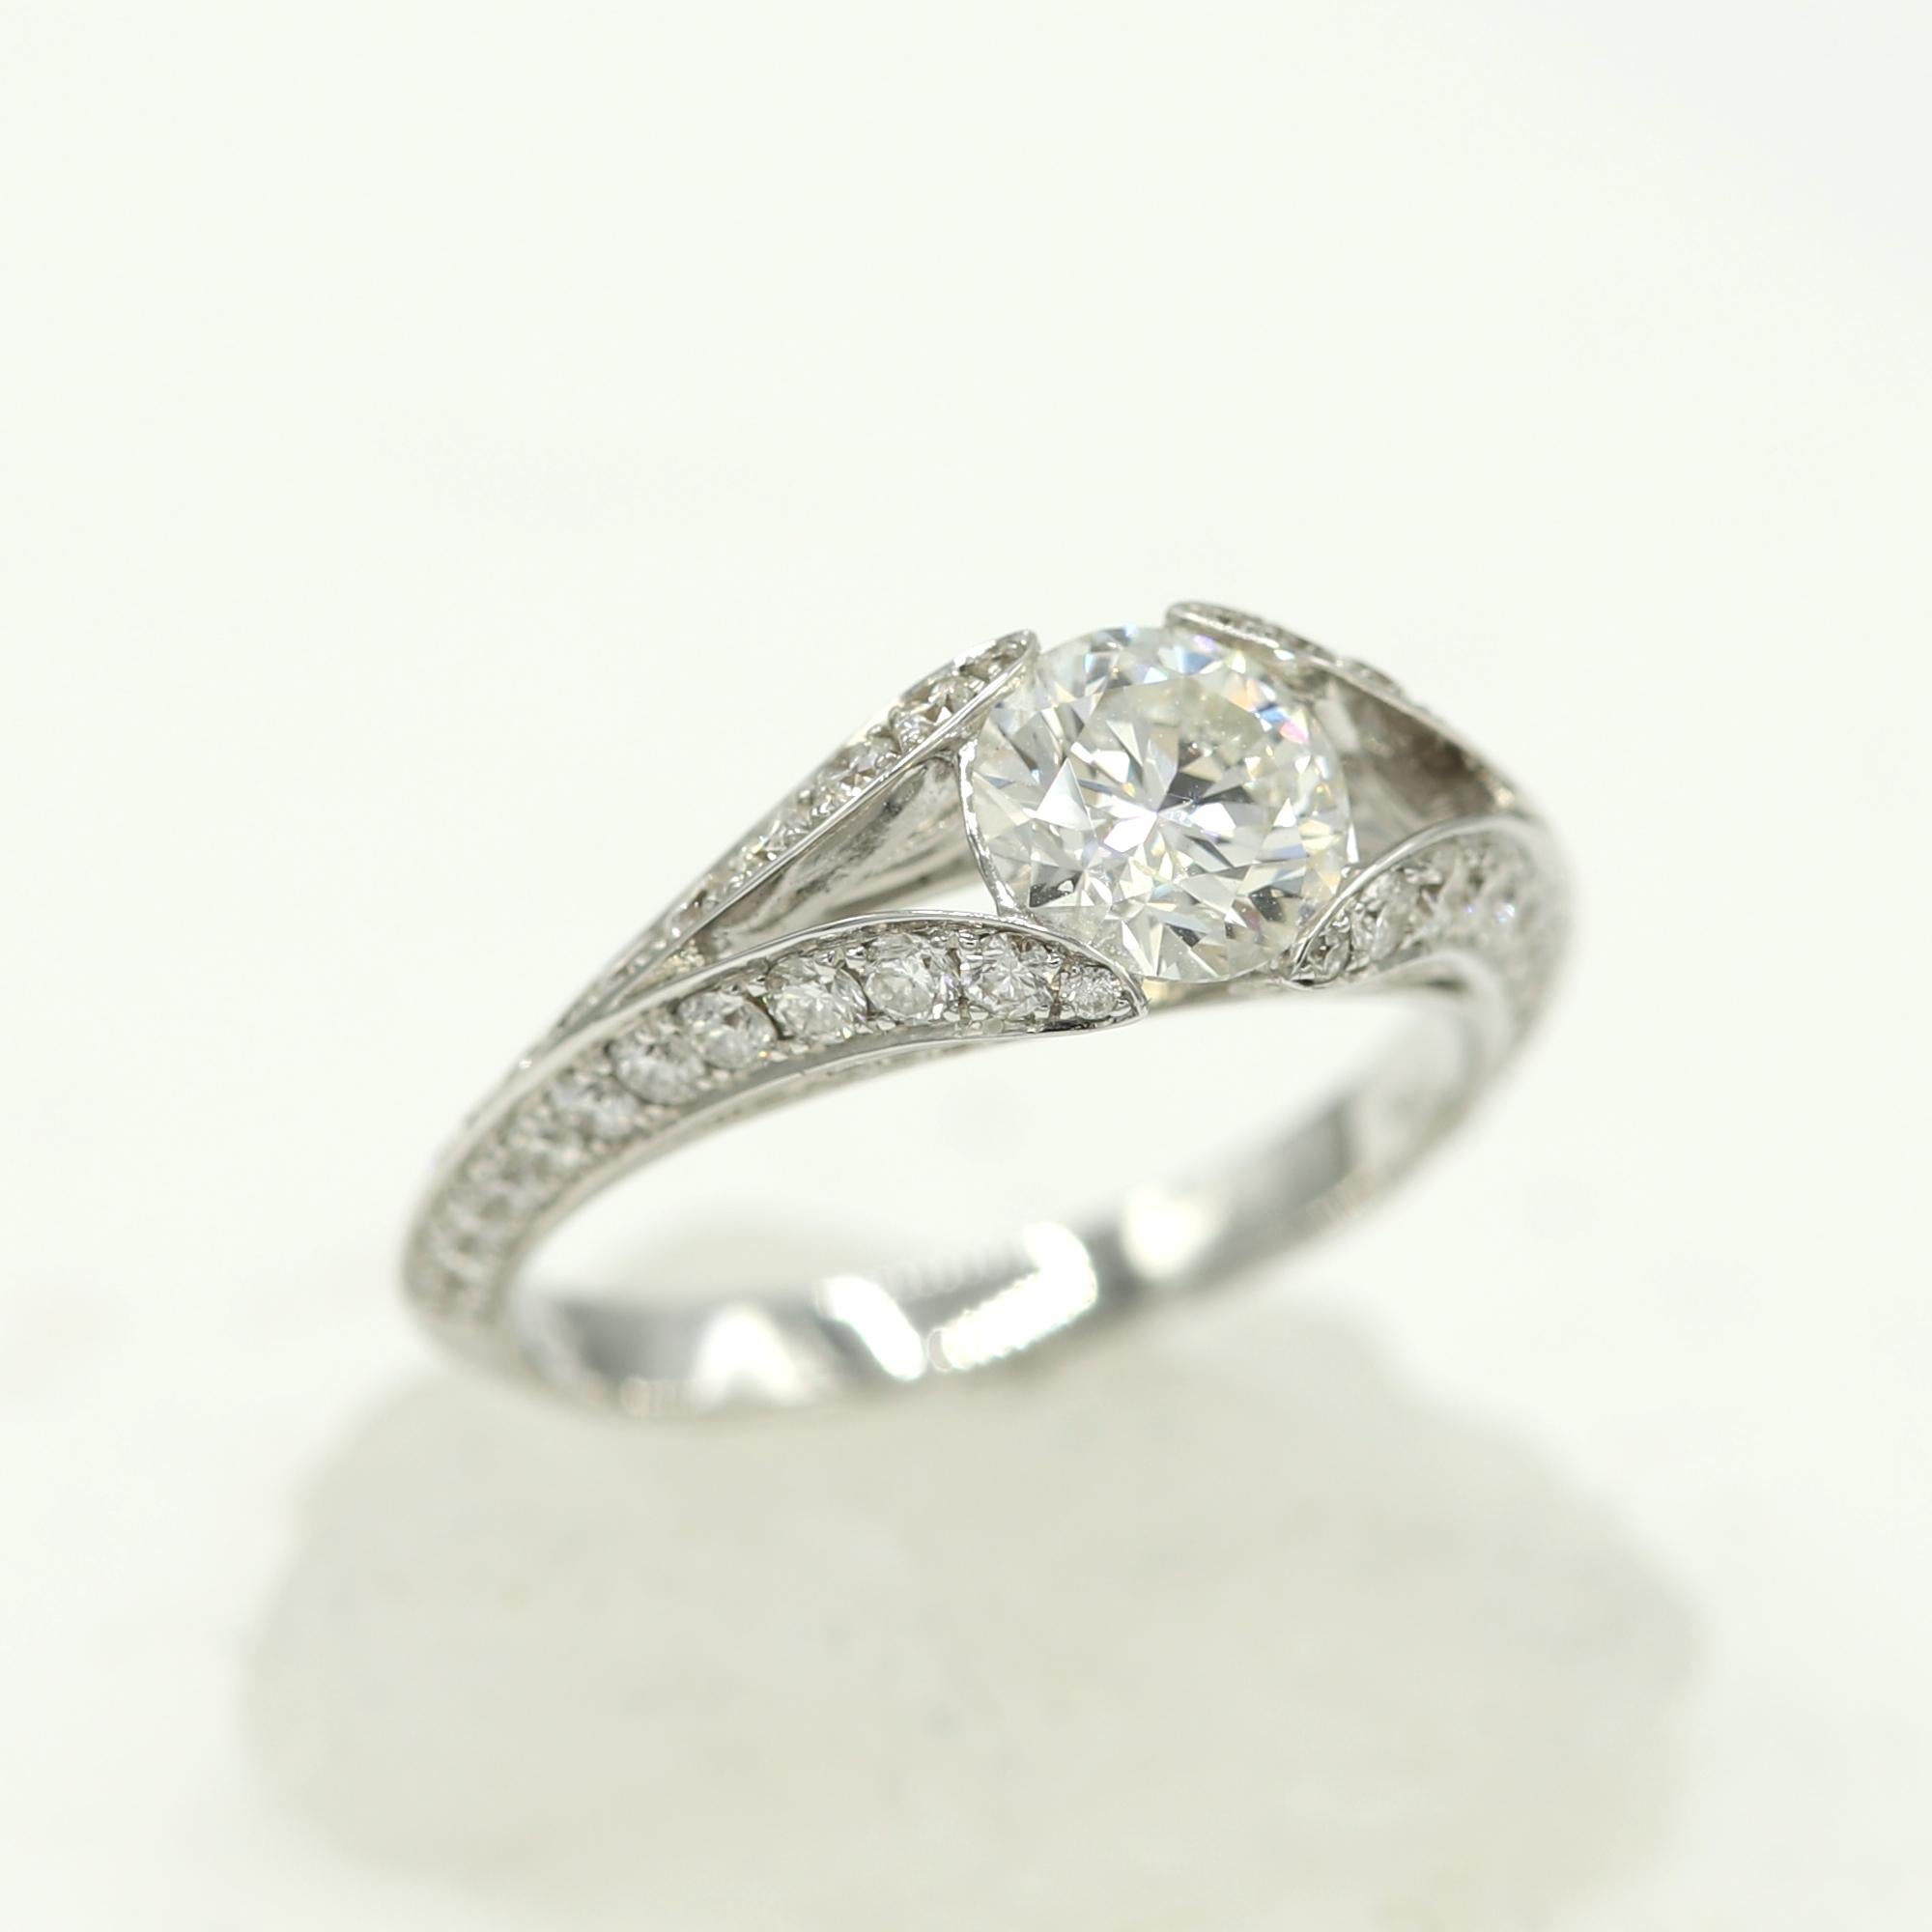 Diamond Ring with a unique bridge setting - the diamond is embedded in the ring design rather then sticking out.
18k white gold 3.70 grams.
Center Diamond size 1.04 carat J-VS1 GIA certificate
round shape. plus small diamonds 0.84 carat.
Finger size